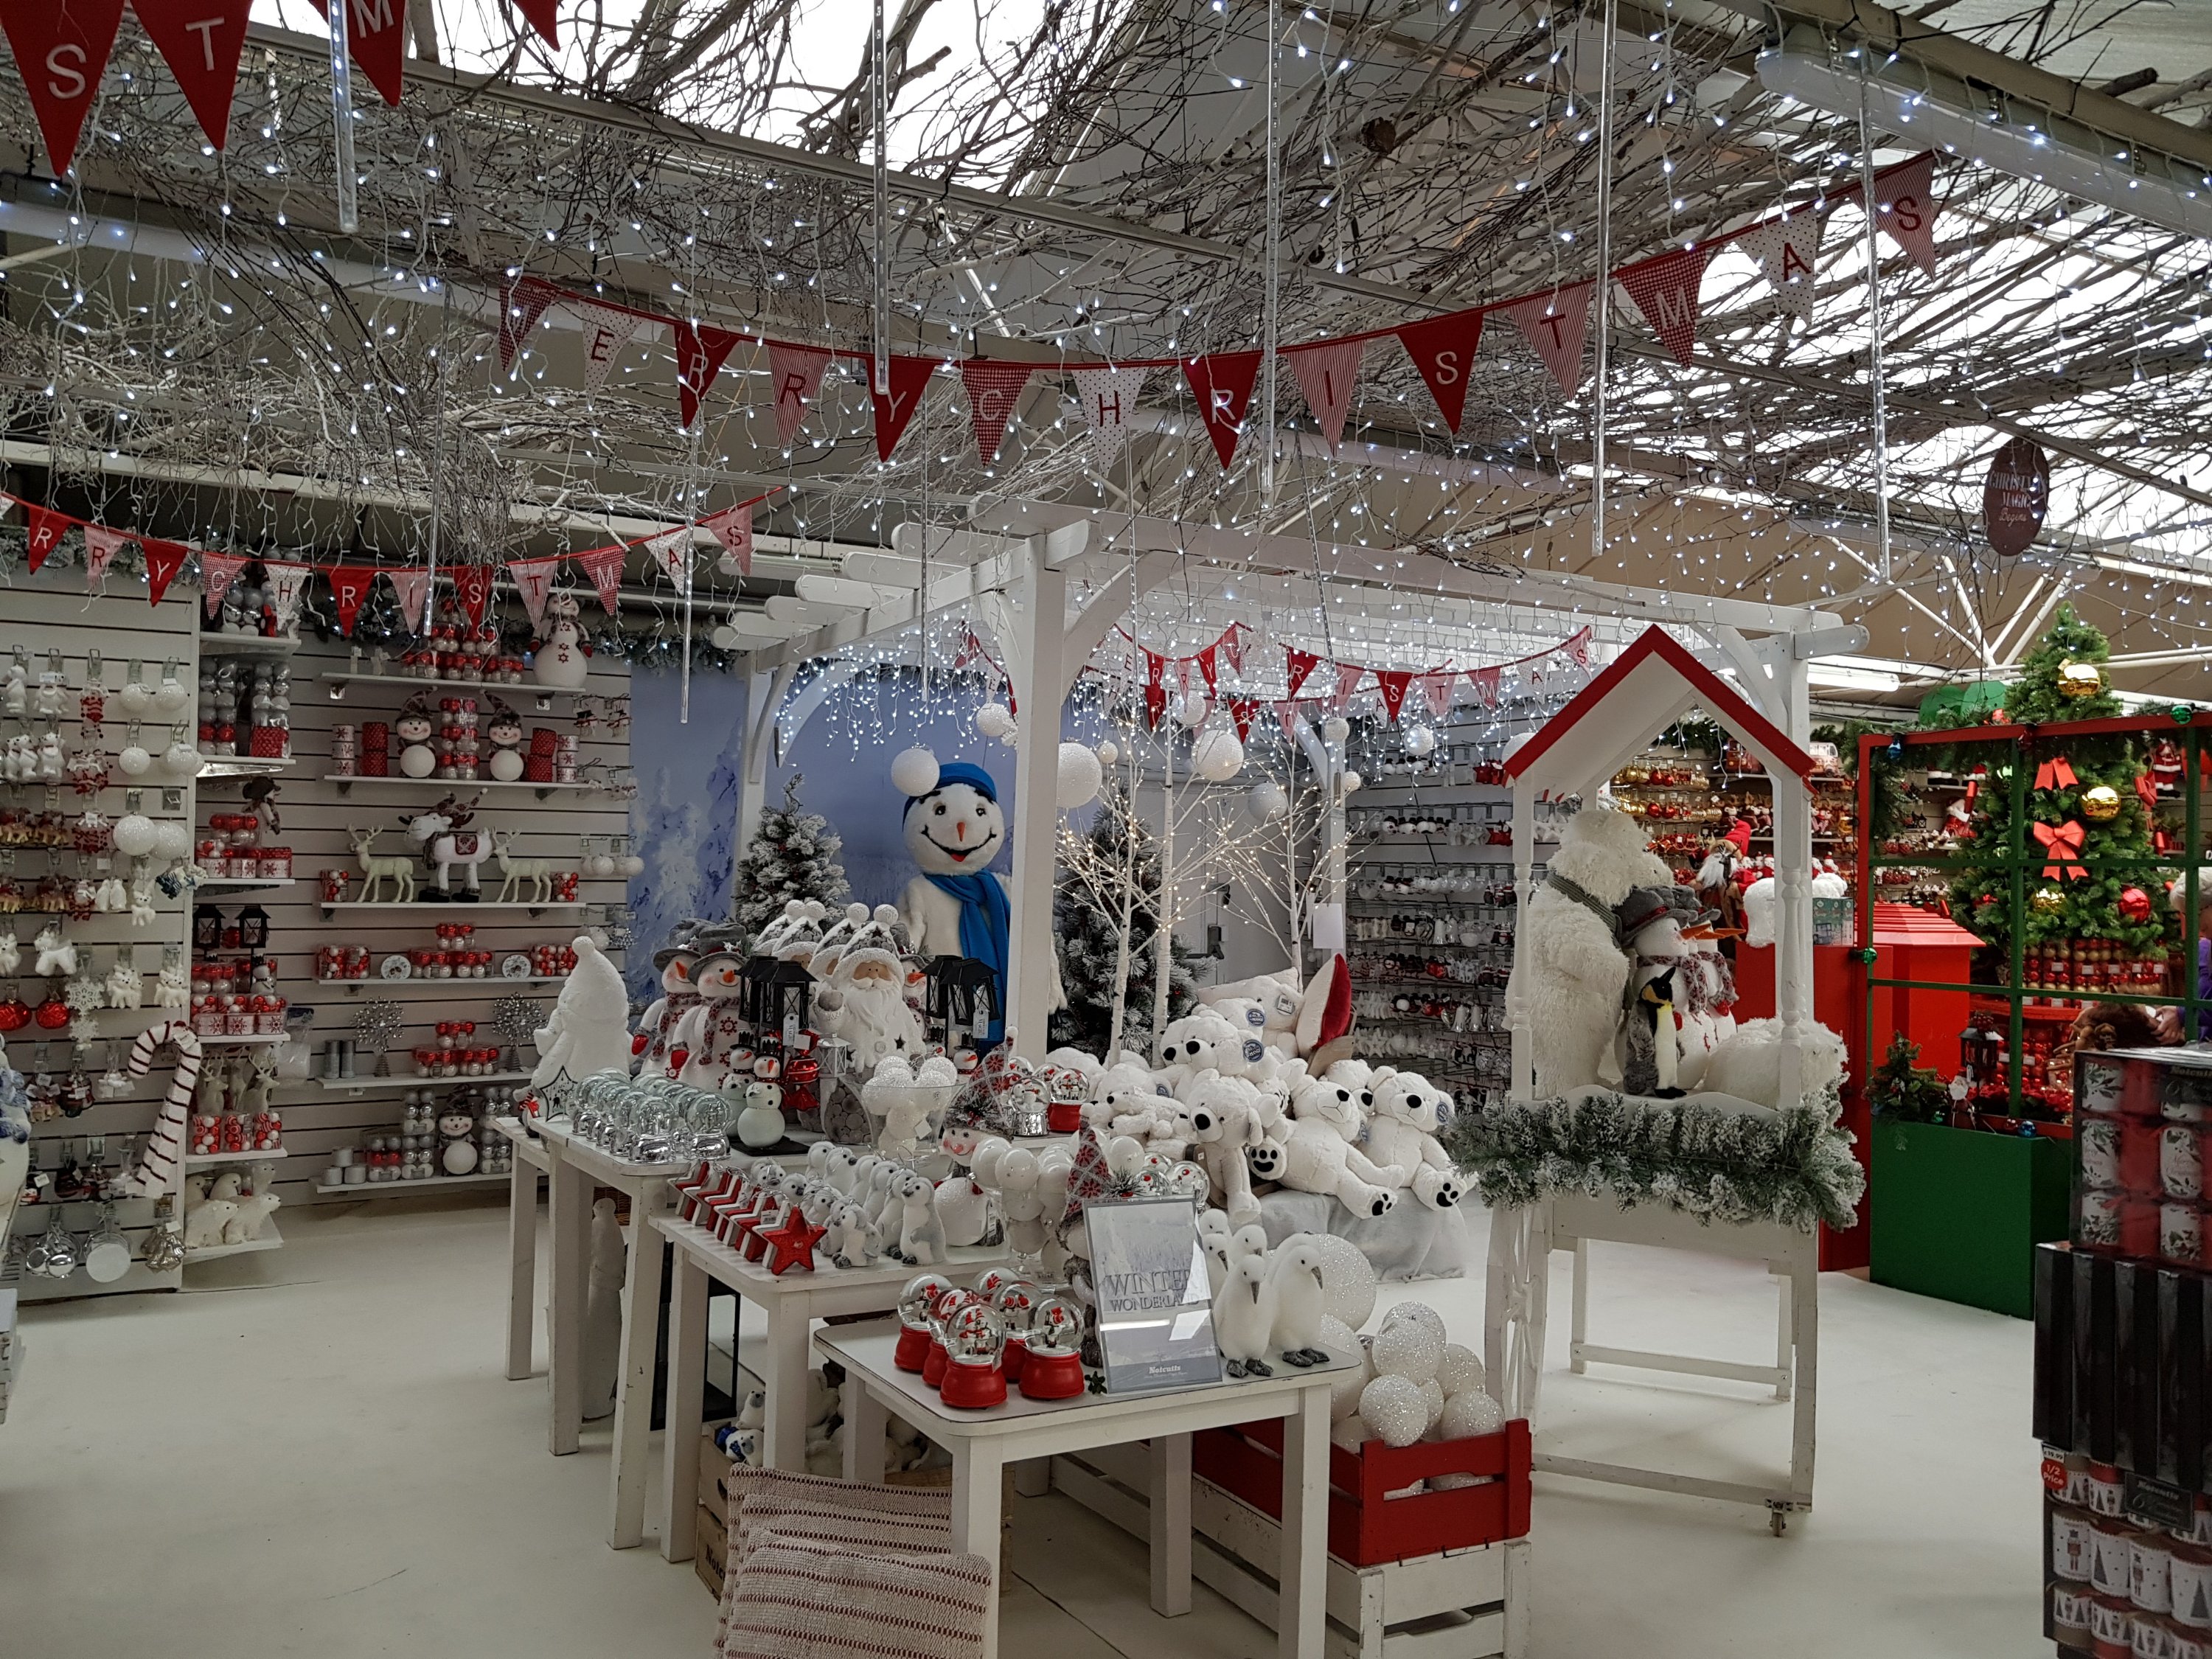 Notcutts Christmas section